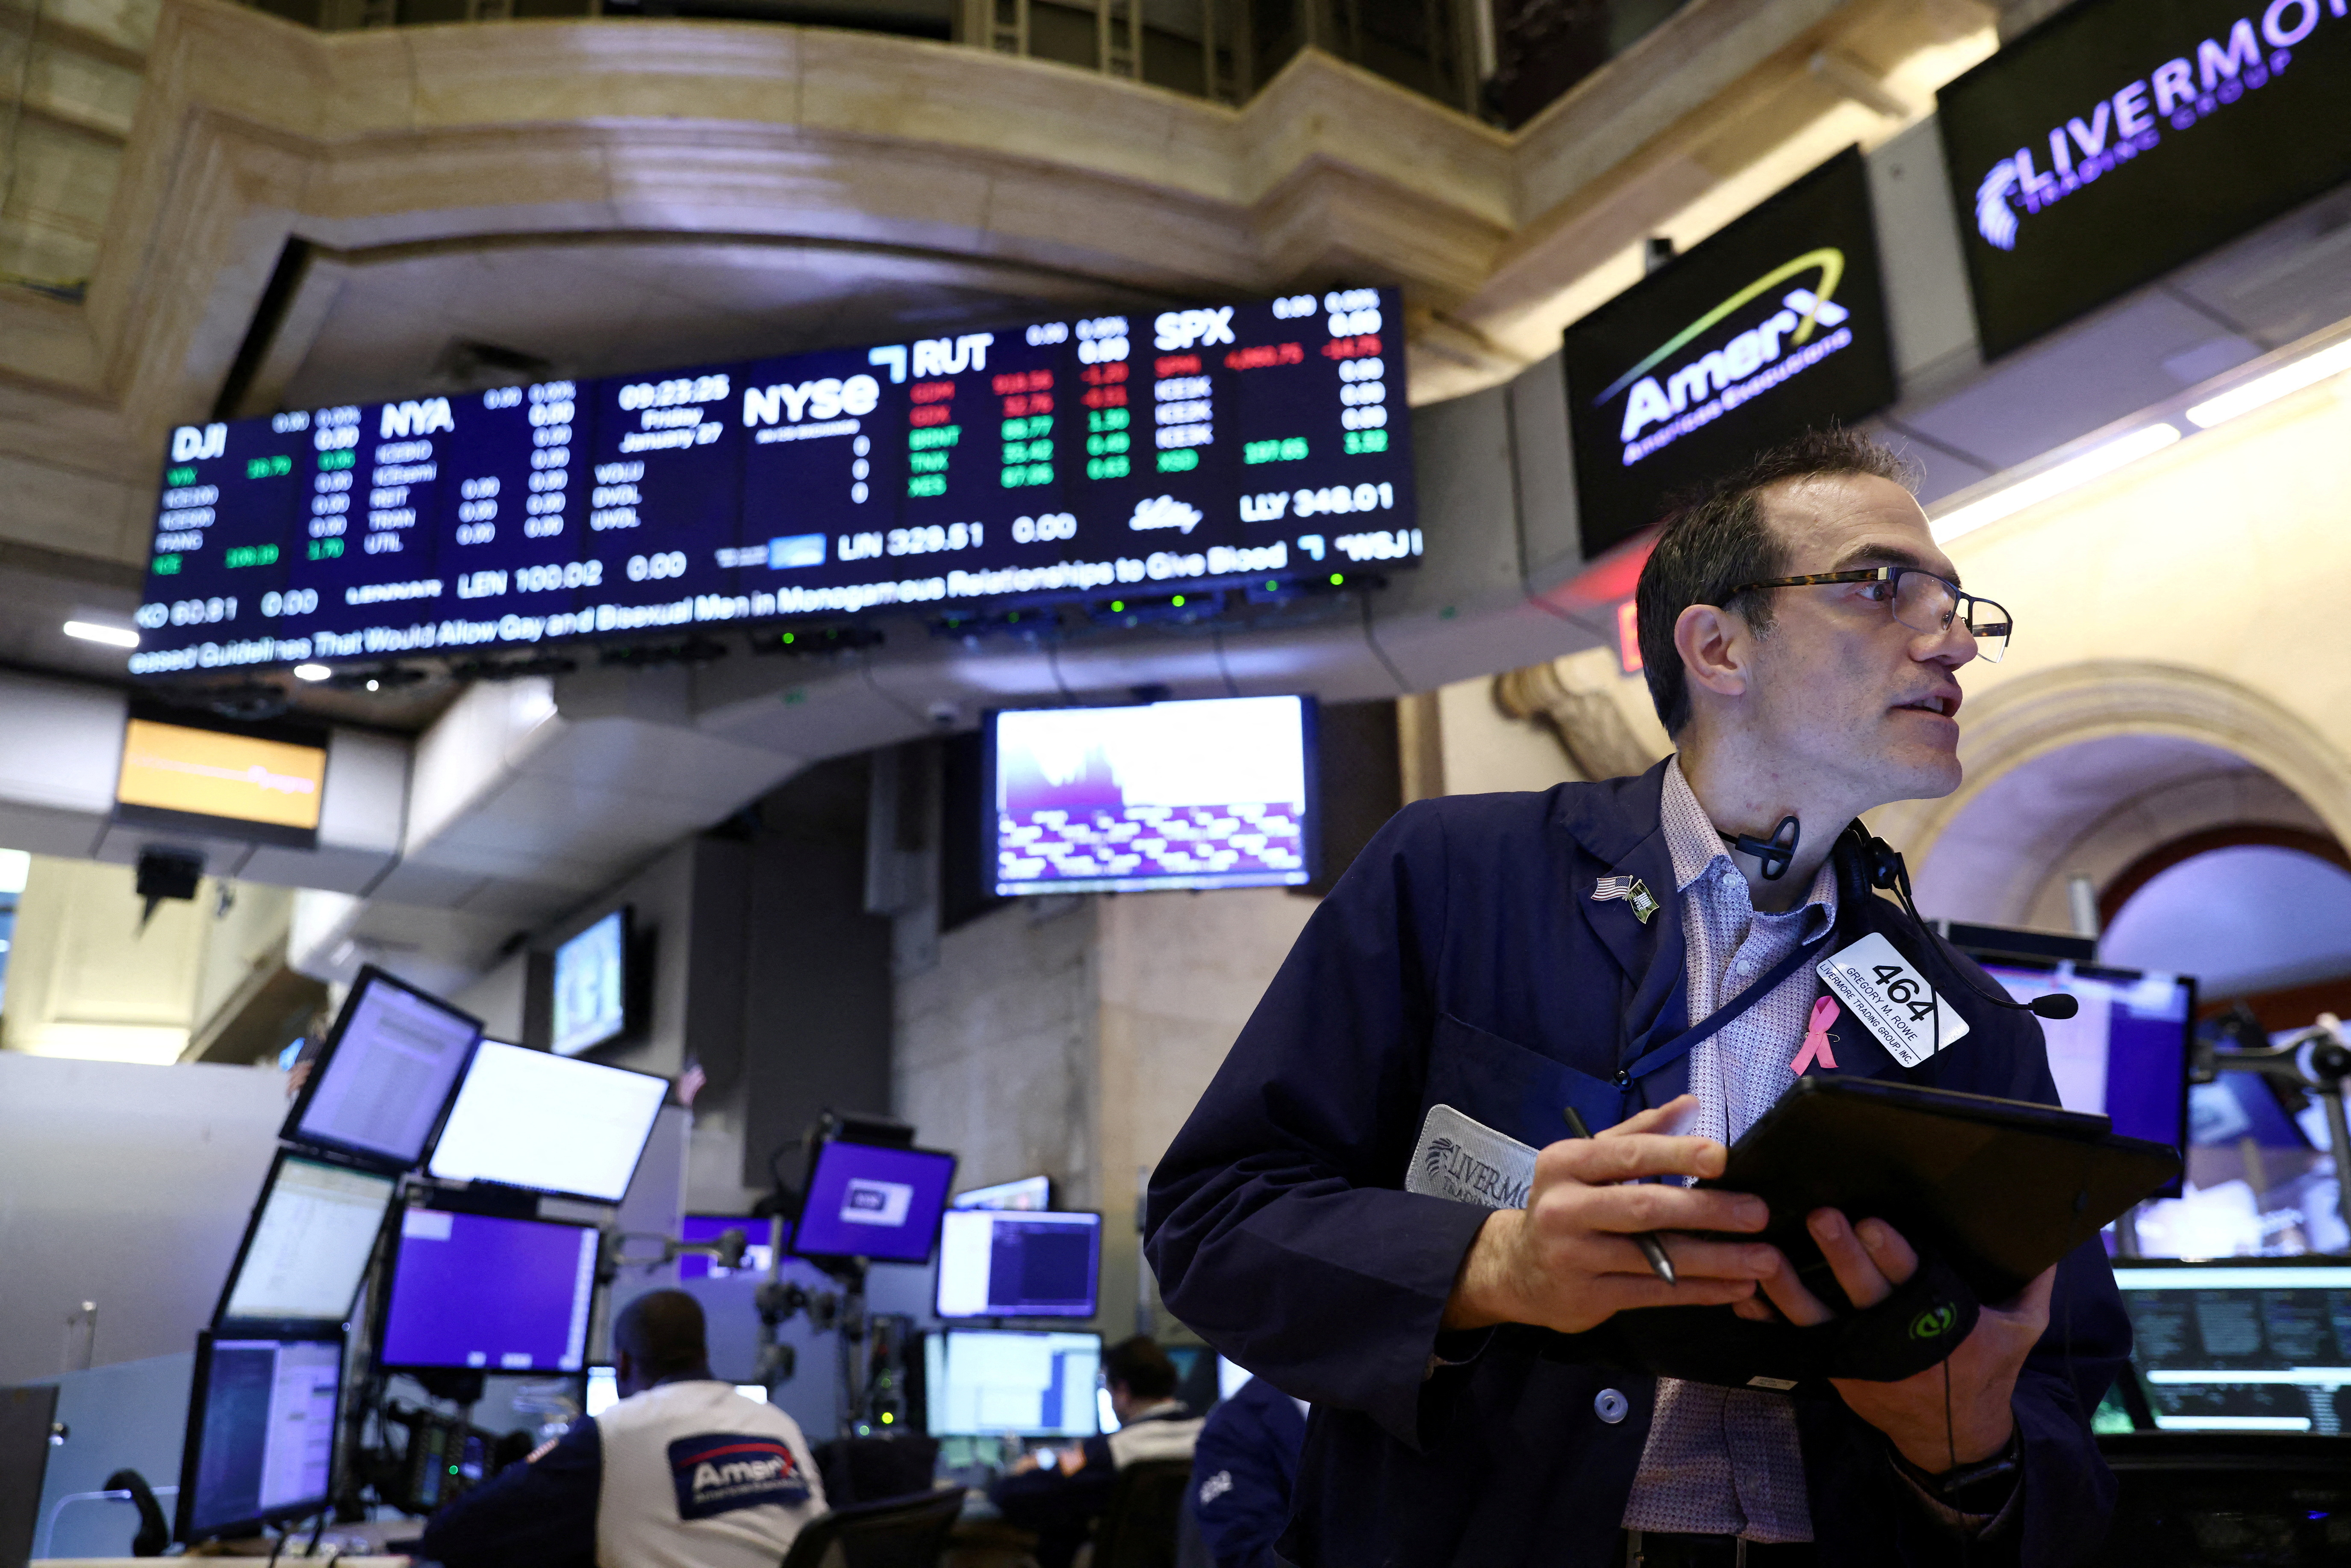 FILE PHOTO: A trader works on the trading floor at the New York Stock Exchange (NYSE) in New York City, U.S.